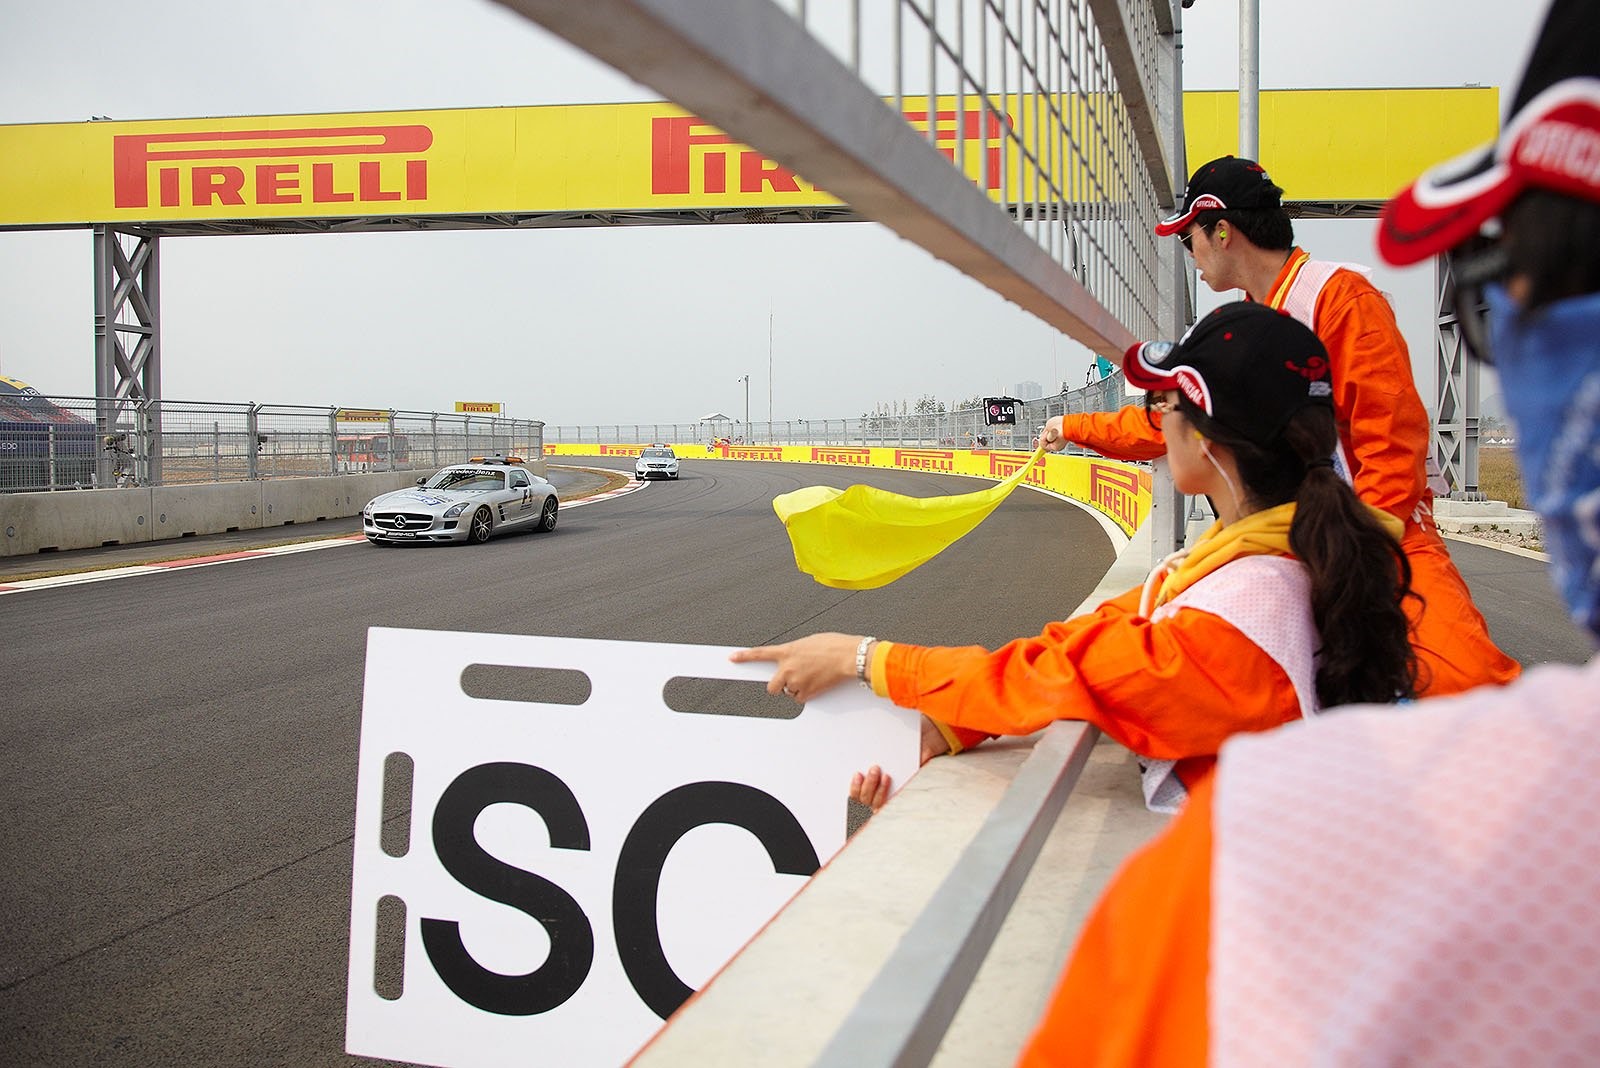 The safety car on tour for track inspection 15 minutes before practice session at Yeongam, South Korea, in 2011. 